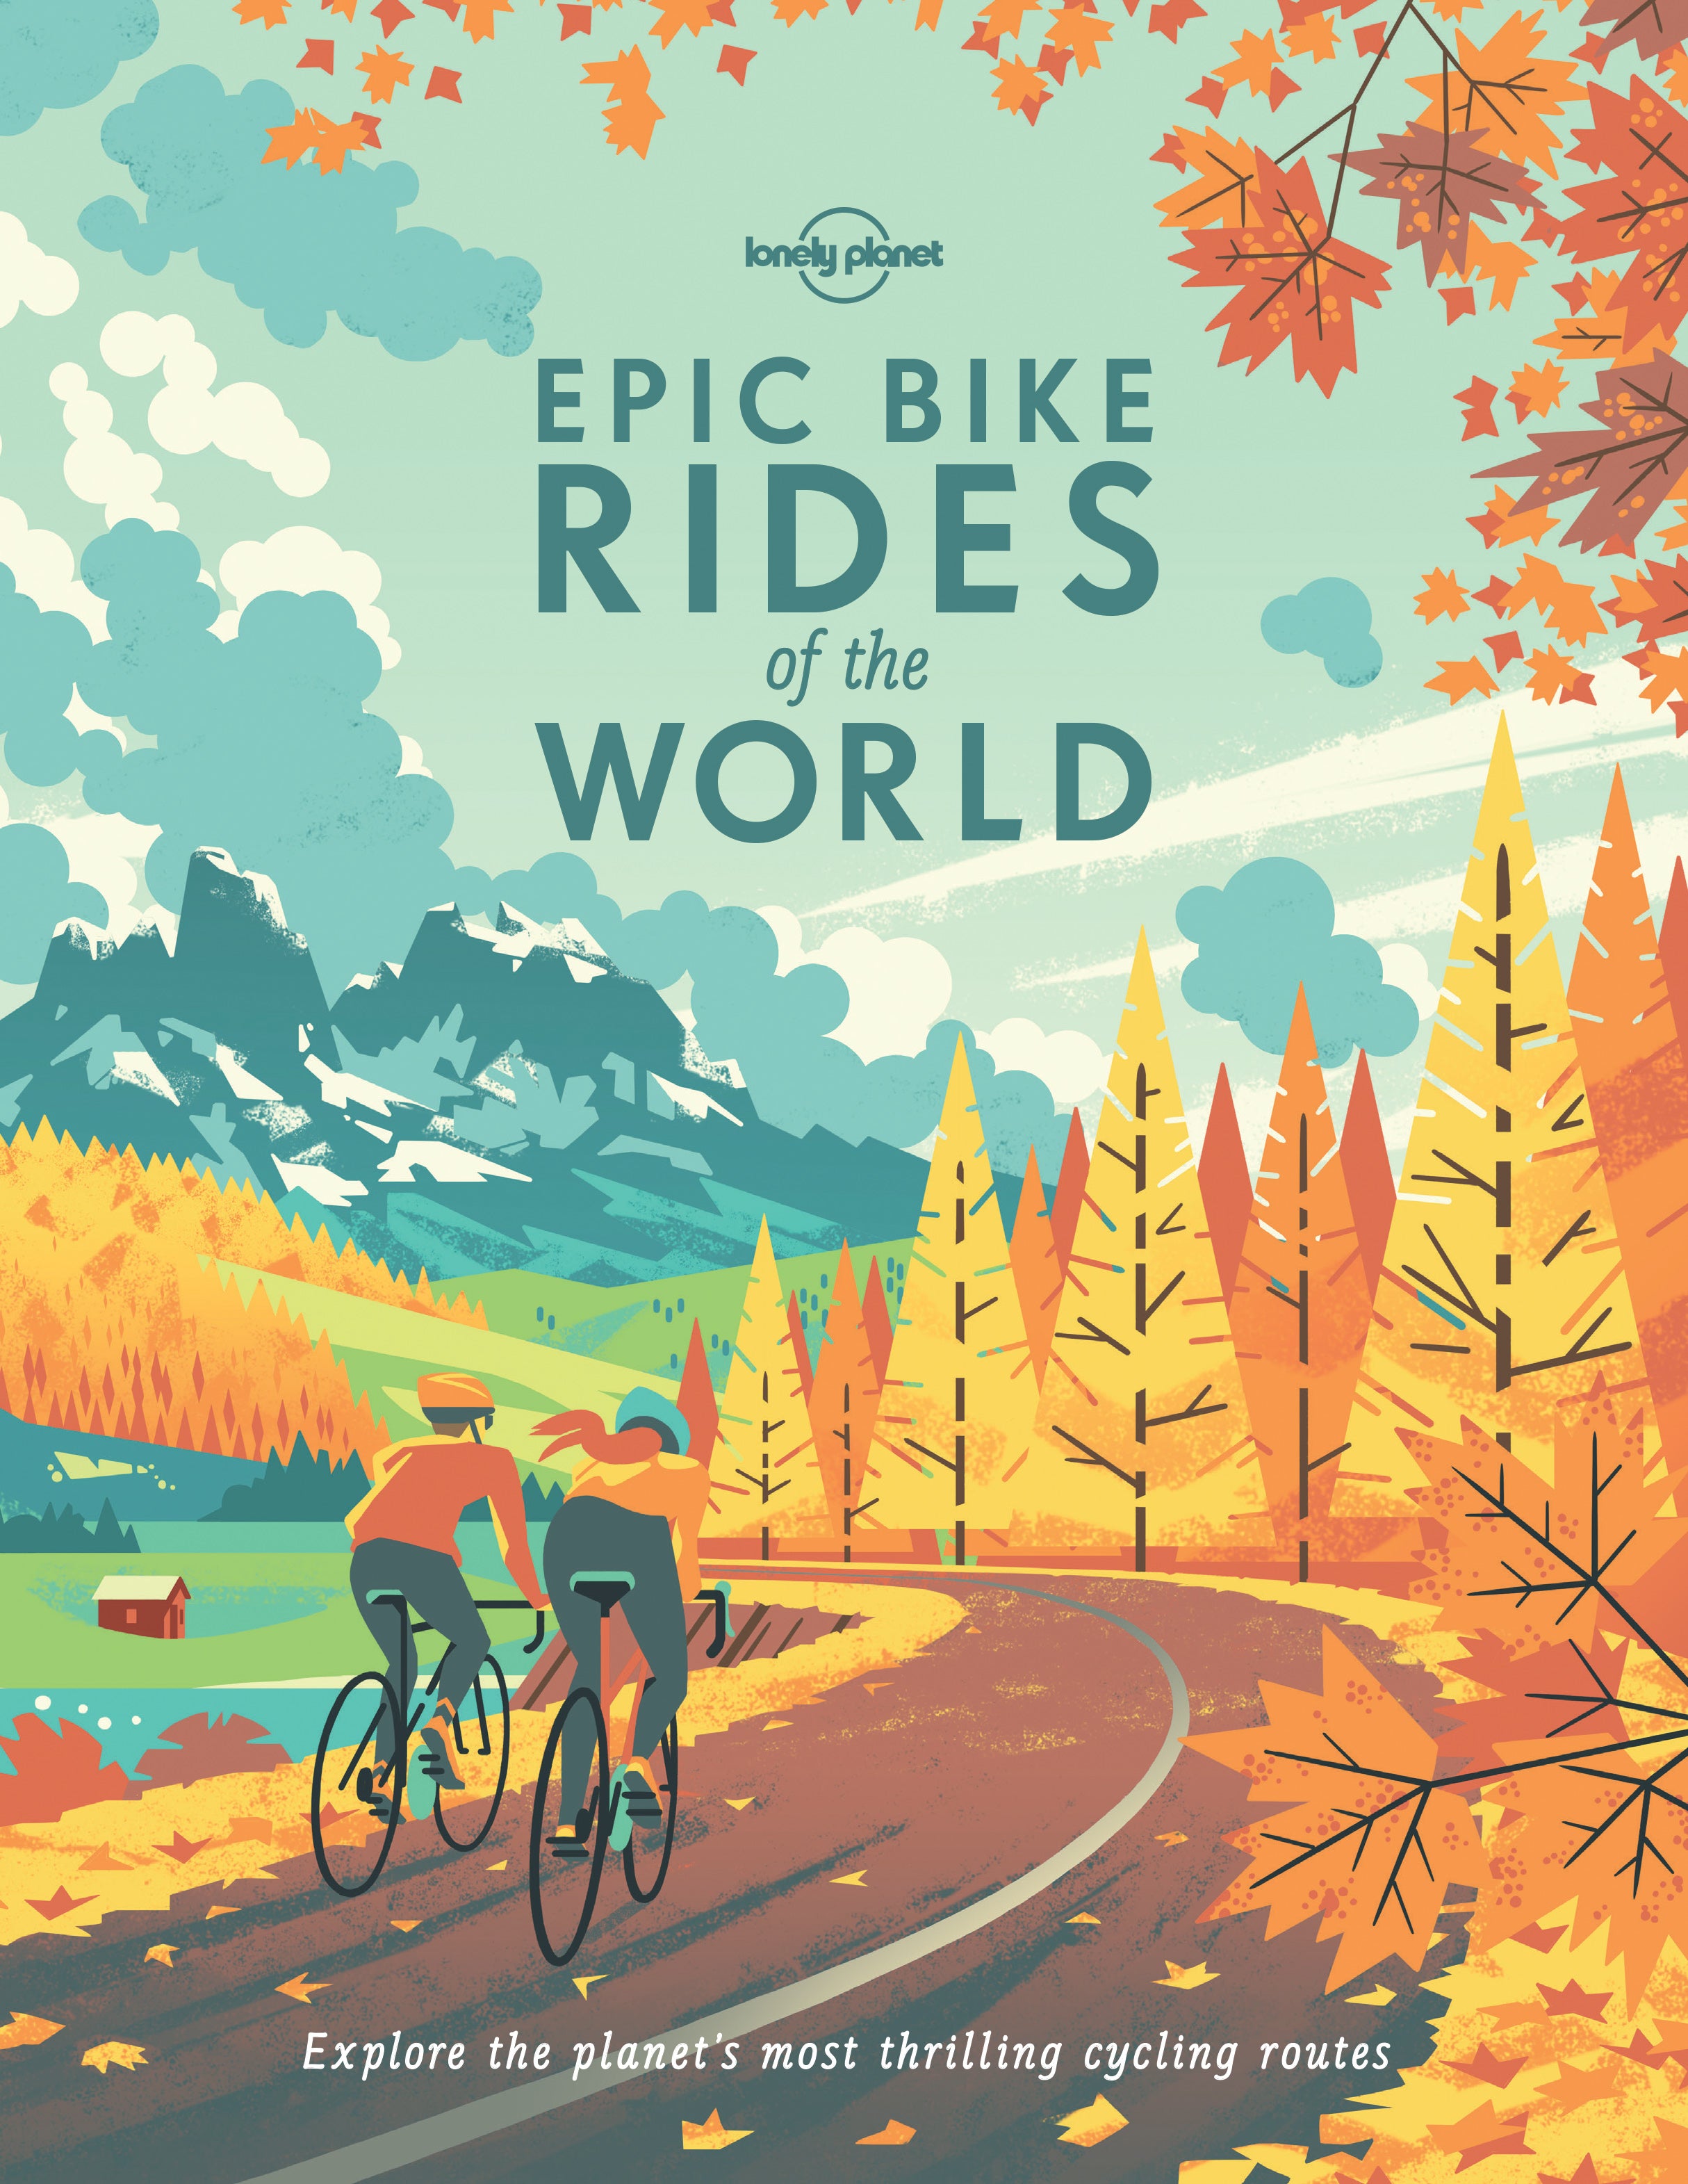 Planet's　World　Lonely　Epic　Lonely　Bike　of　Rides　the　Planet　Shop